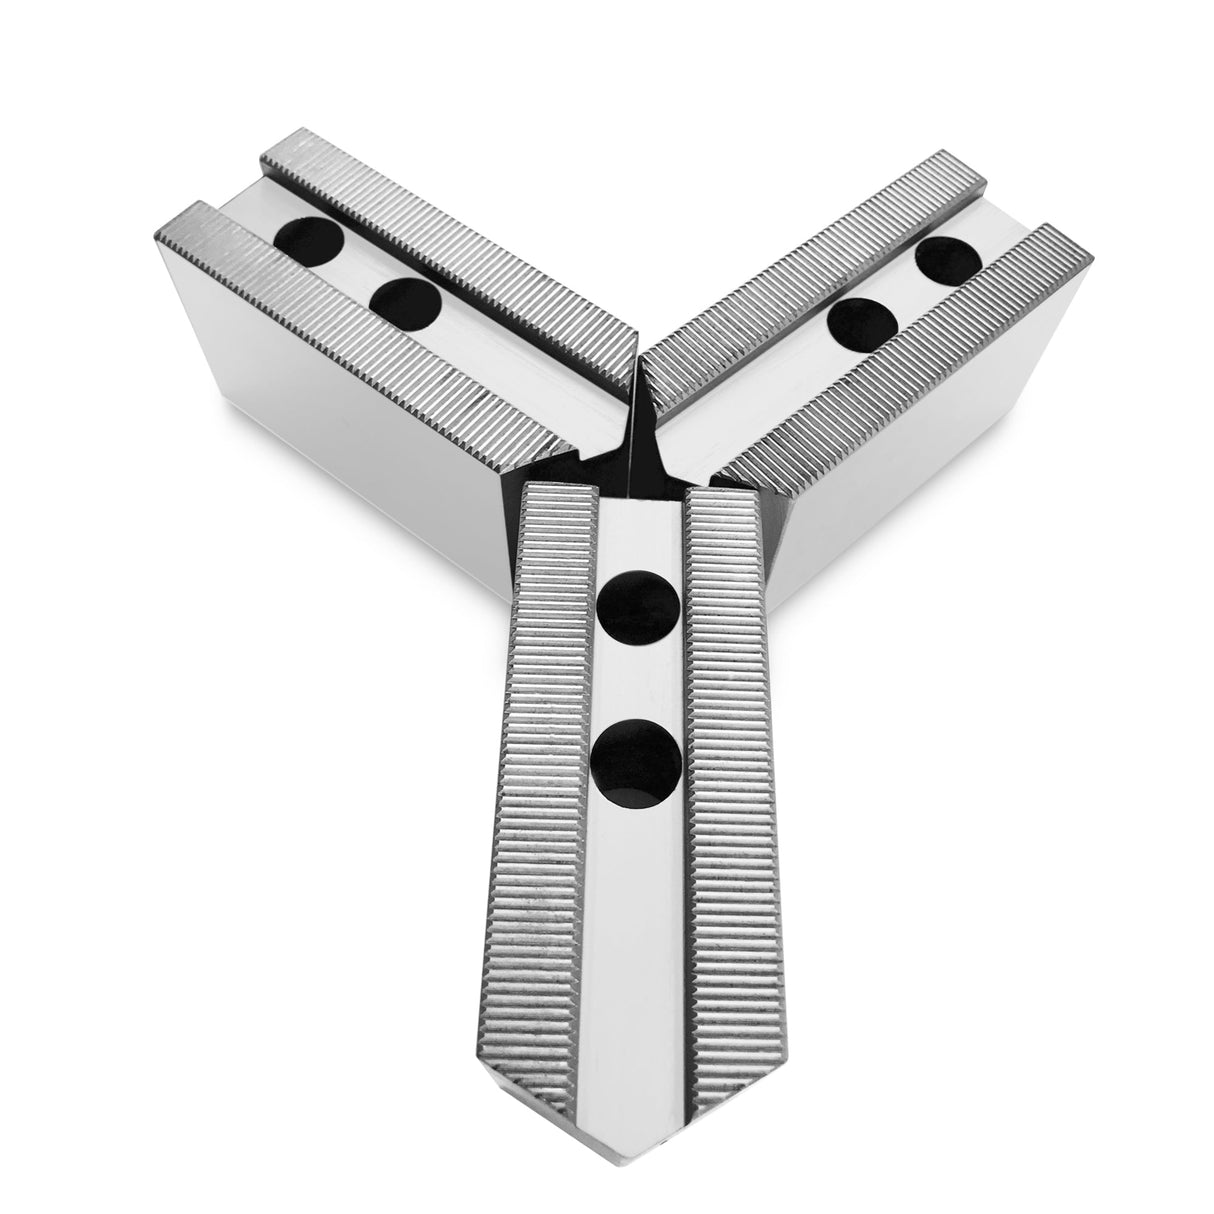 K-8C-4.0-SP- Steel Soft Jaws For 8" Chuck (Kitagawa, Samchully), Pointed, height 4" - 3pc set